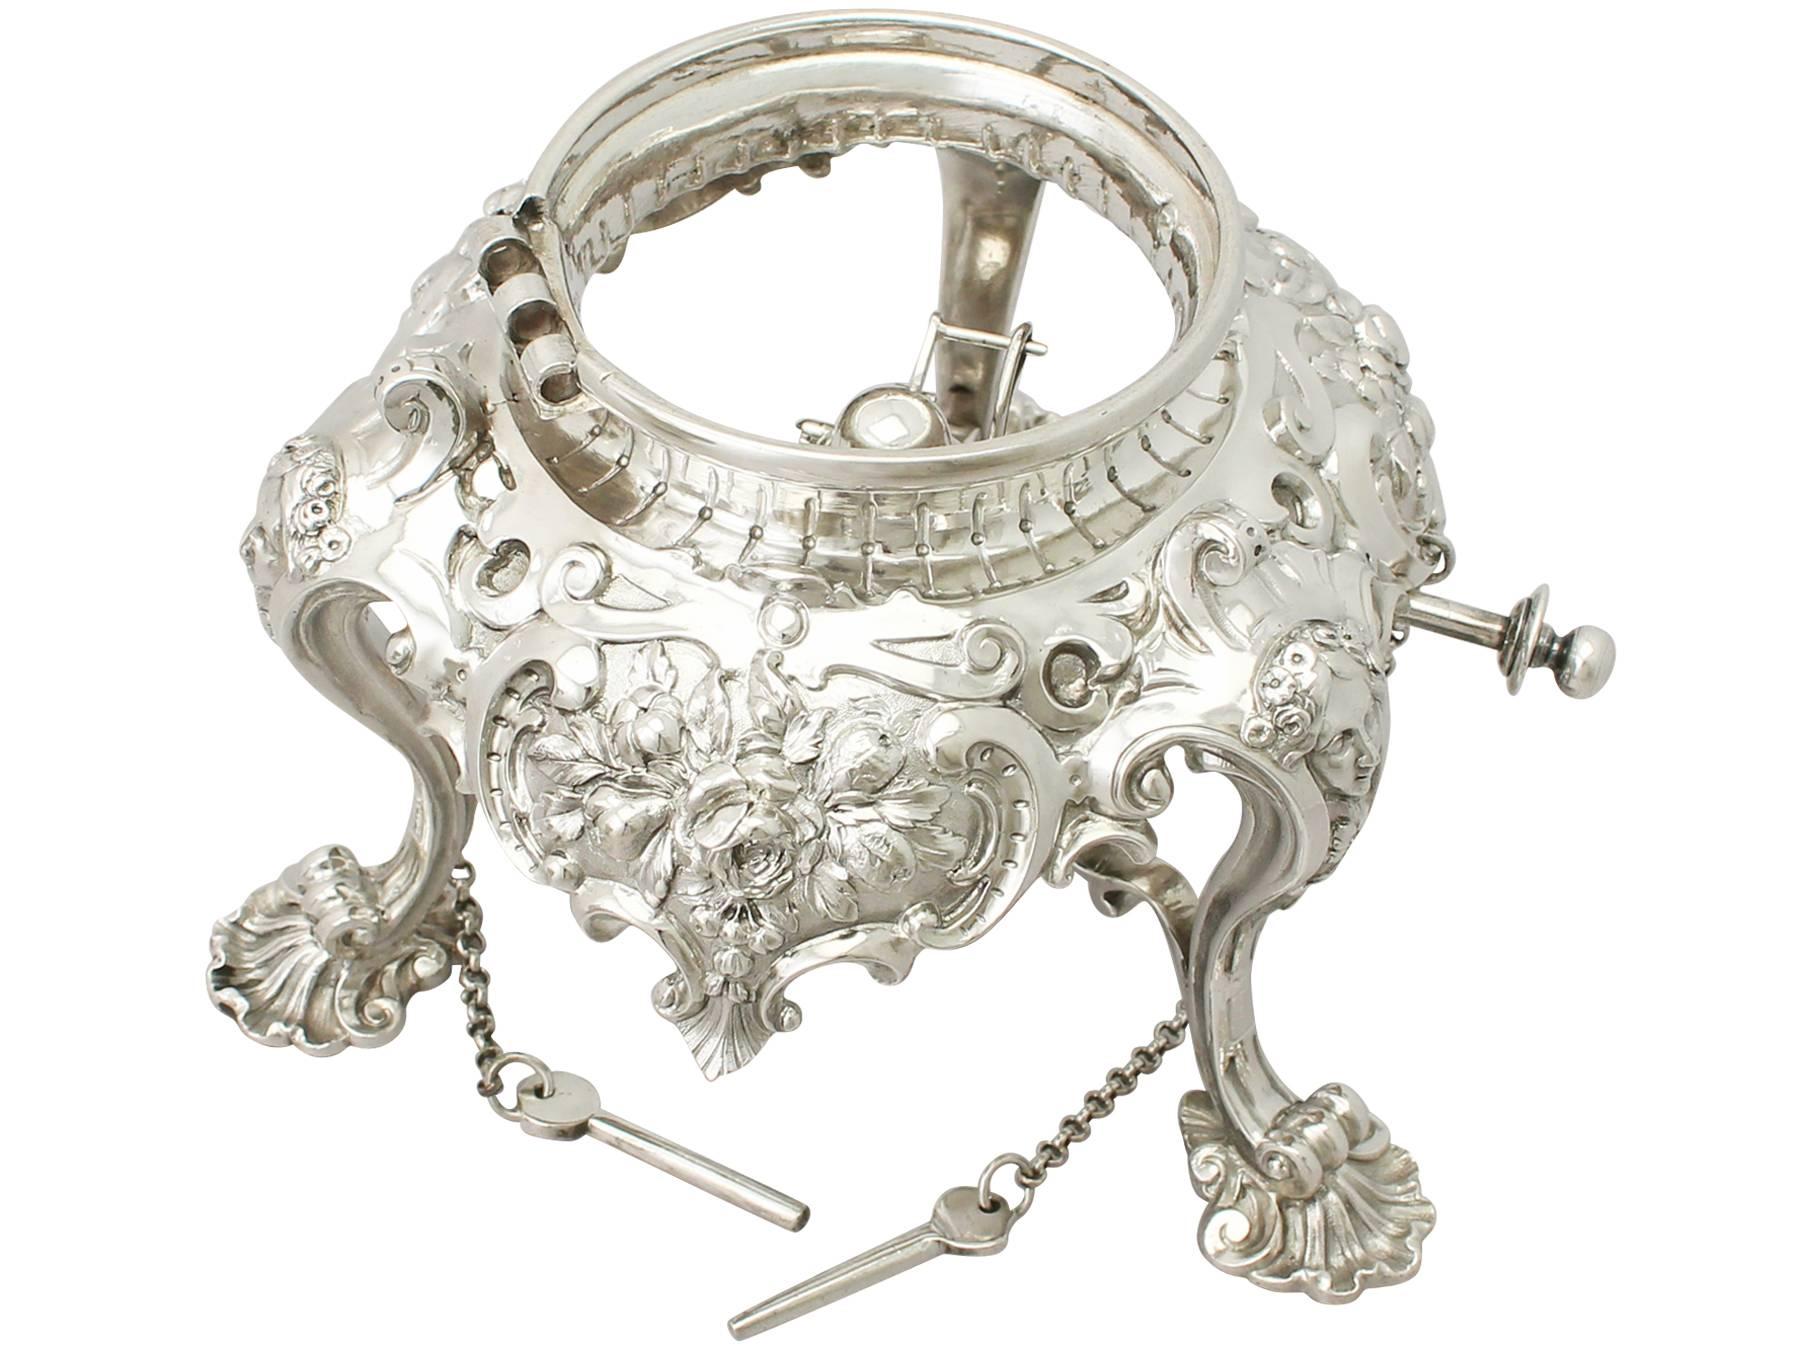 Mid-19th Century Antique Victorian English Sterling Silver Spirit Kettle, 1854